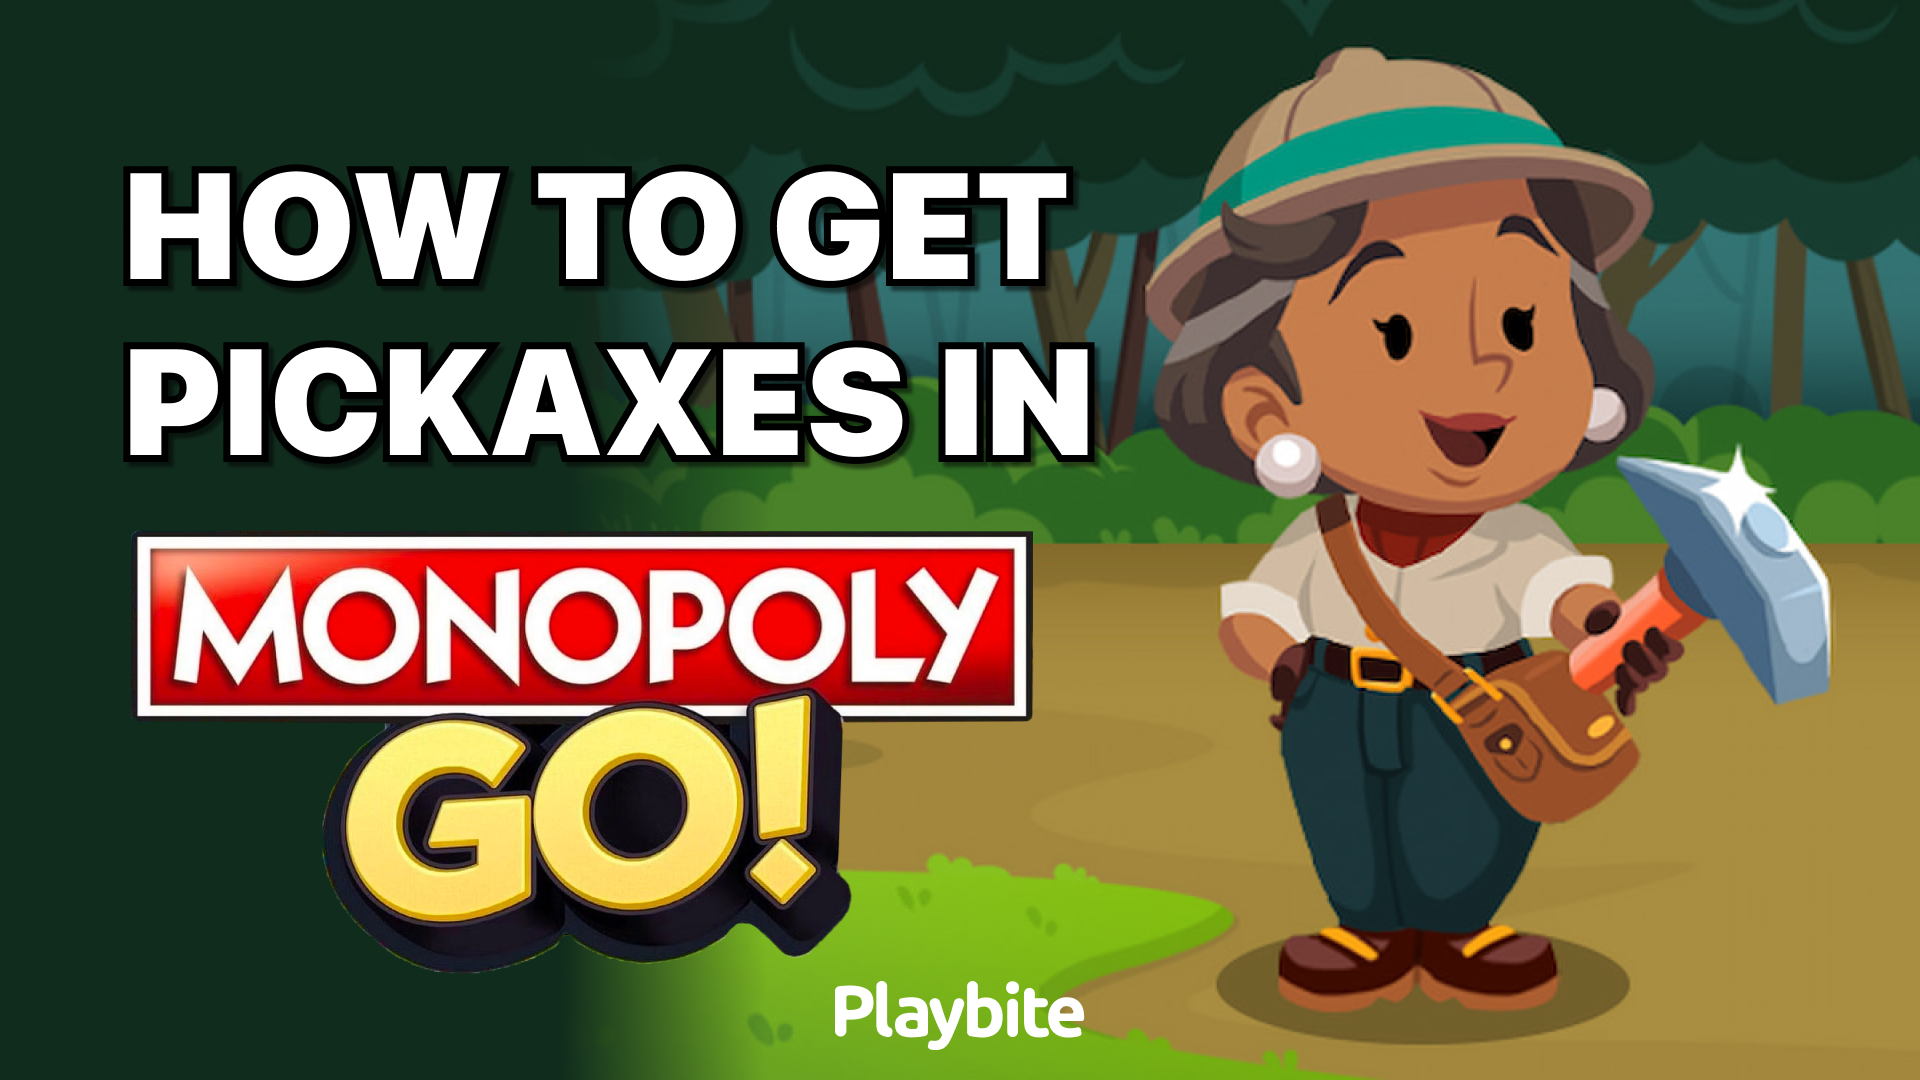 How To Get Pickaxes In Monopoly GO!